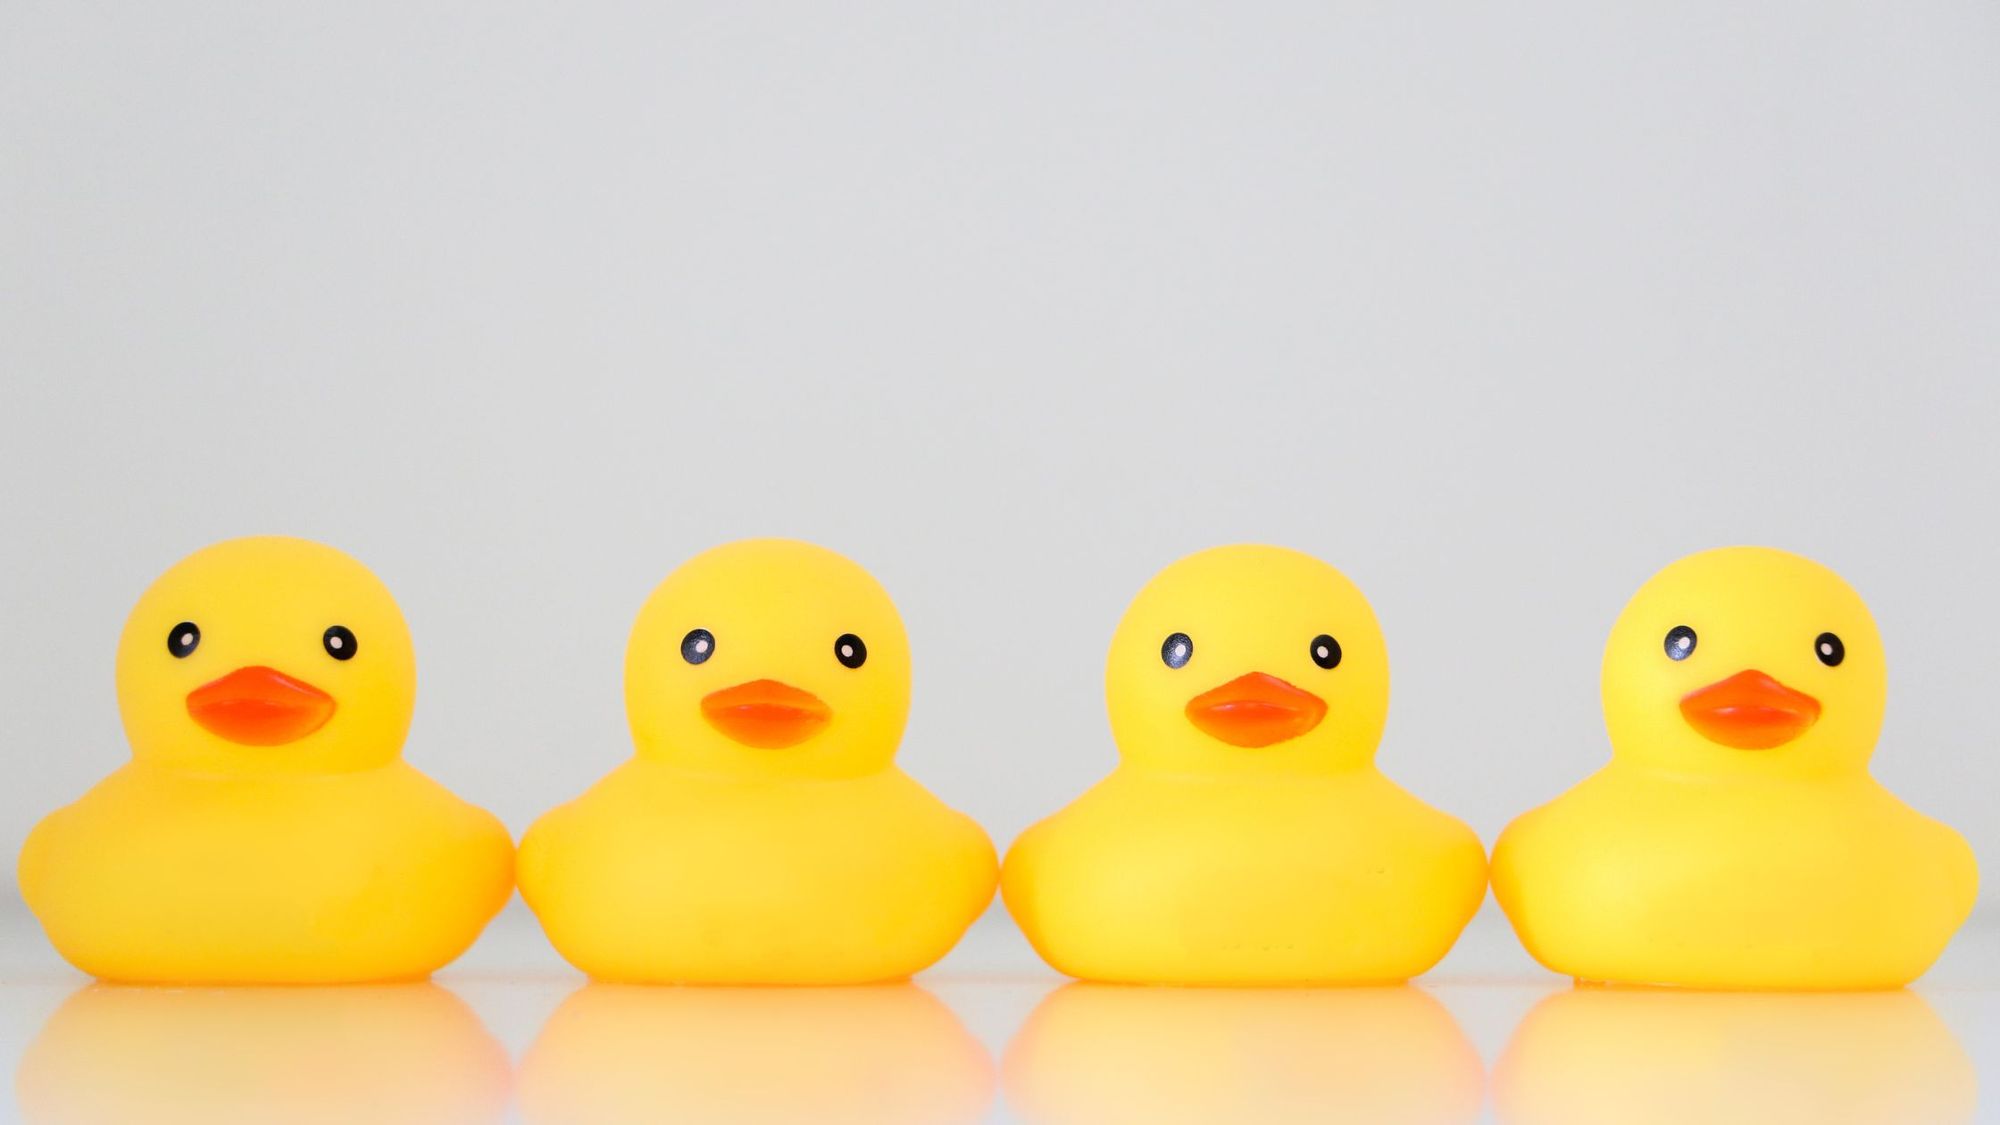 "Why Do They Use The Phrase "Getting Your Ducks In A Row In The Workplace?"